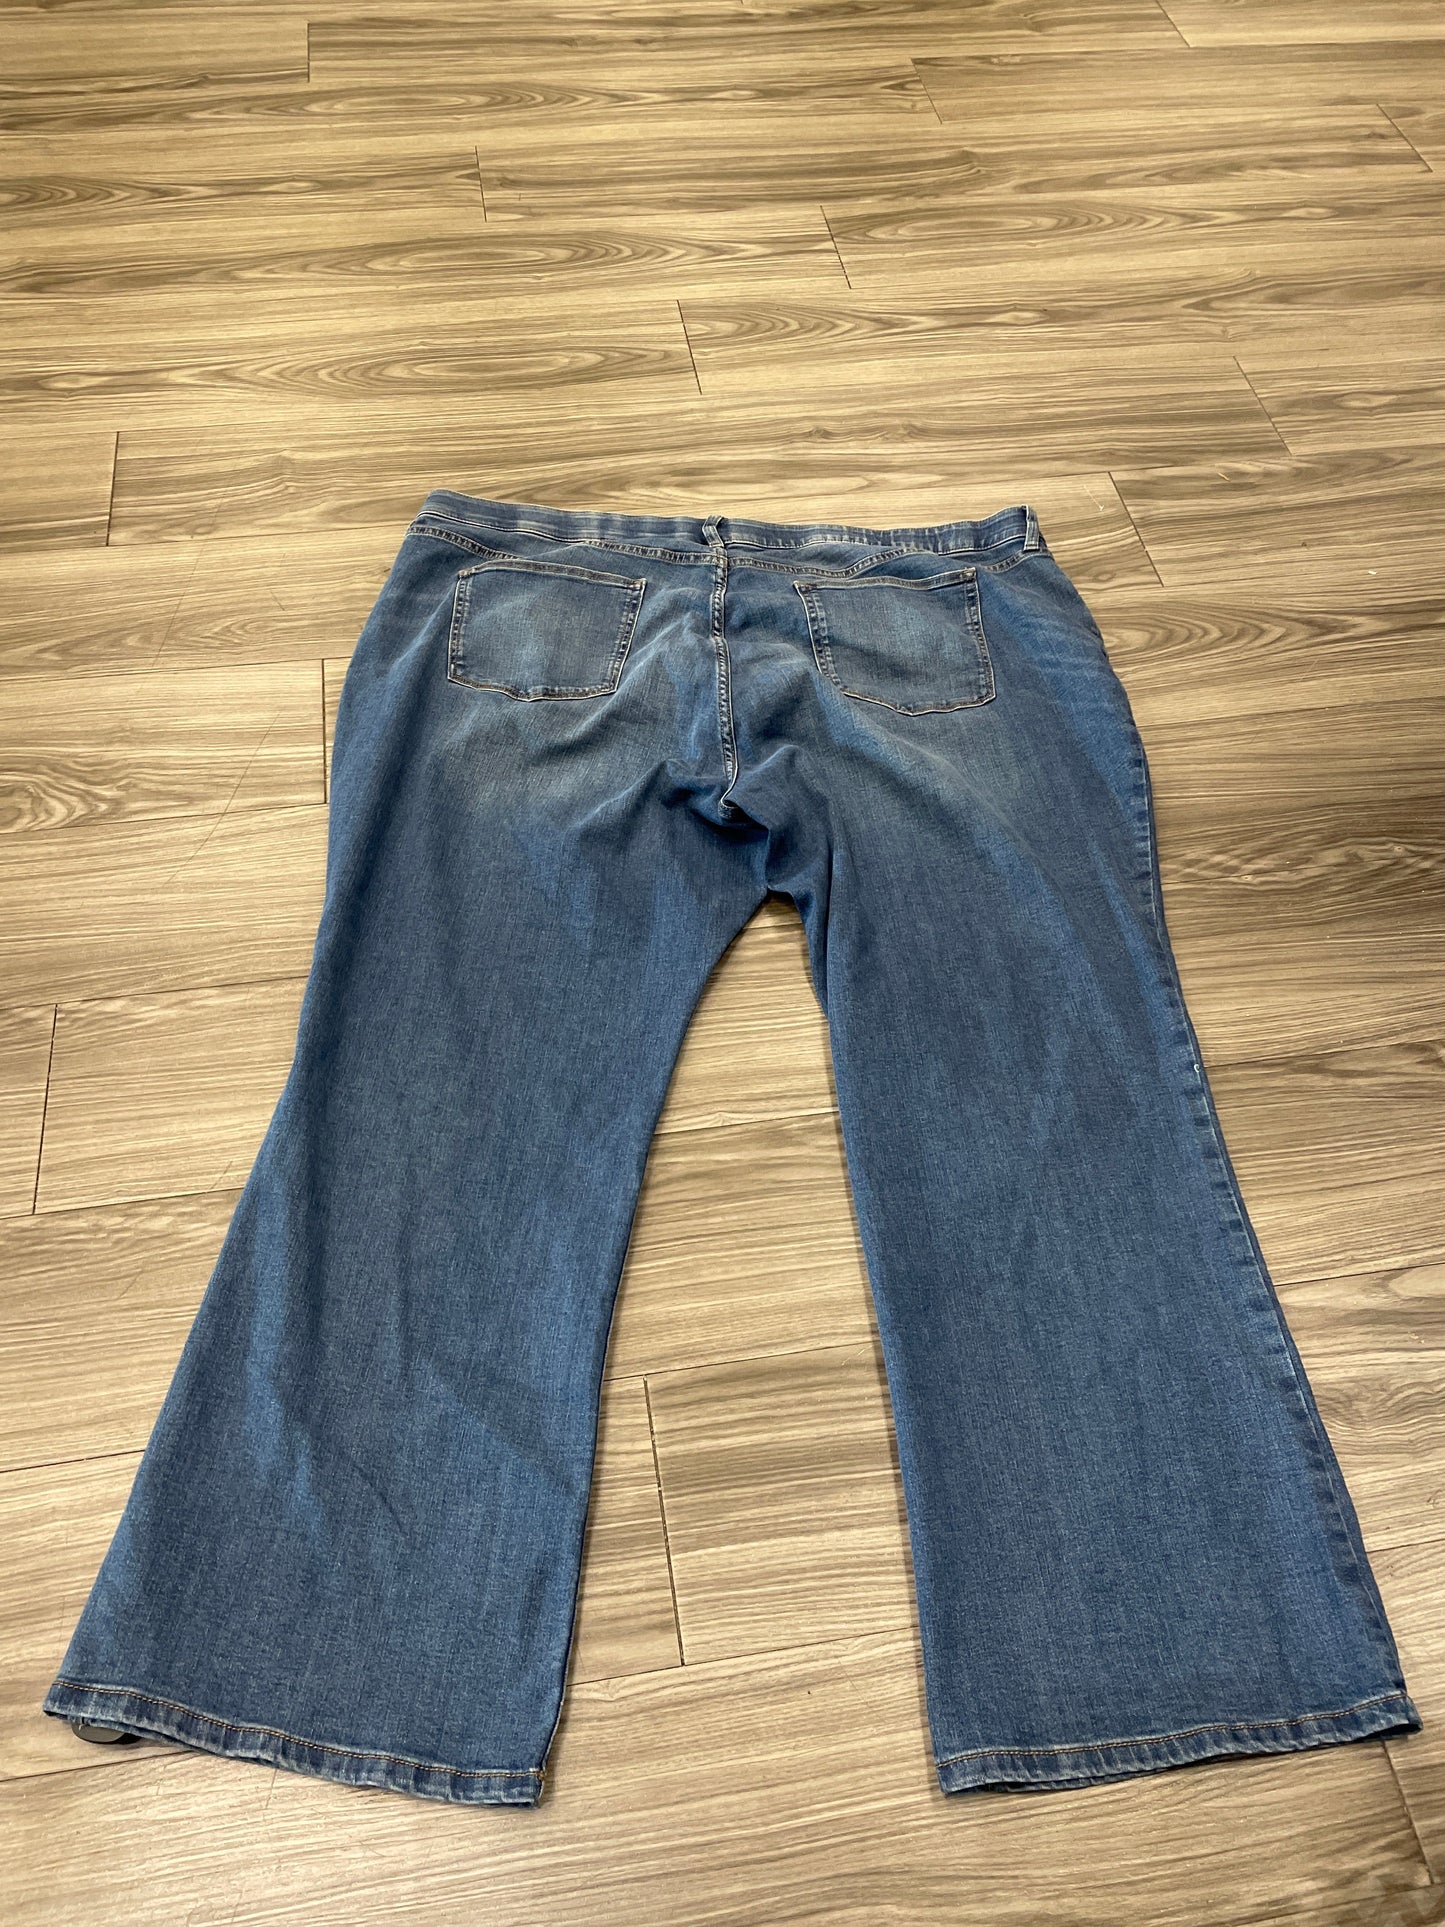 Jeans Flared By St Johns Bay  Size: 28w